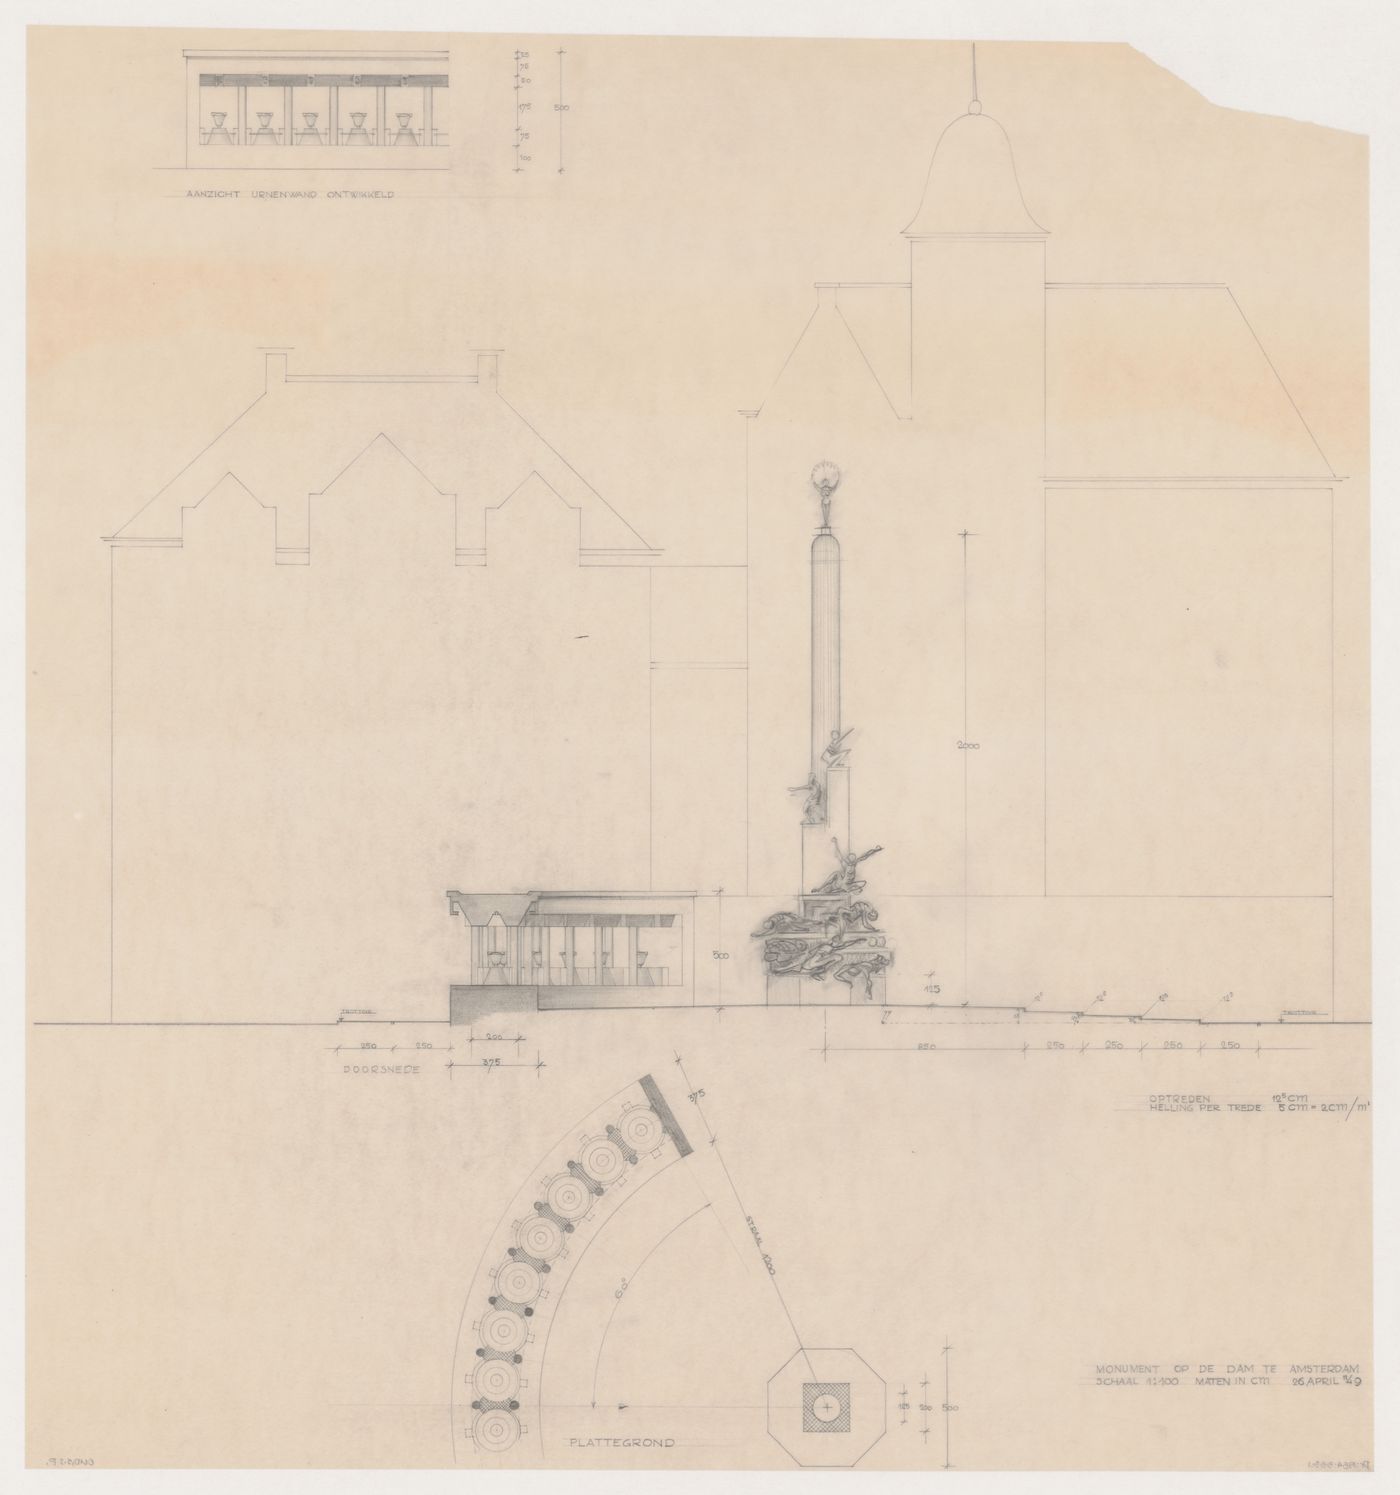 Partial section for the National Monument with partial elevation and partial plan for the wall of urns, showing sculptures by Johannes Anton Rädecker and Johan Rädecker, Dam Square, Amsterdam, Netherlands